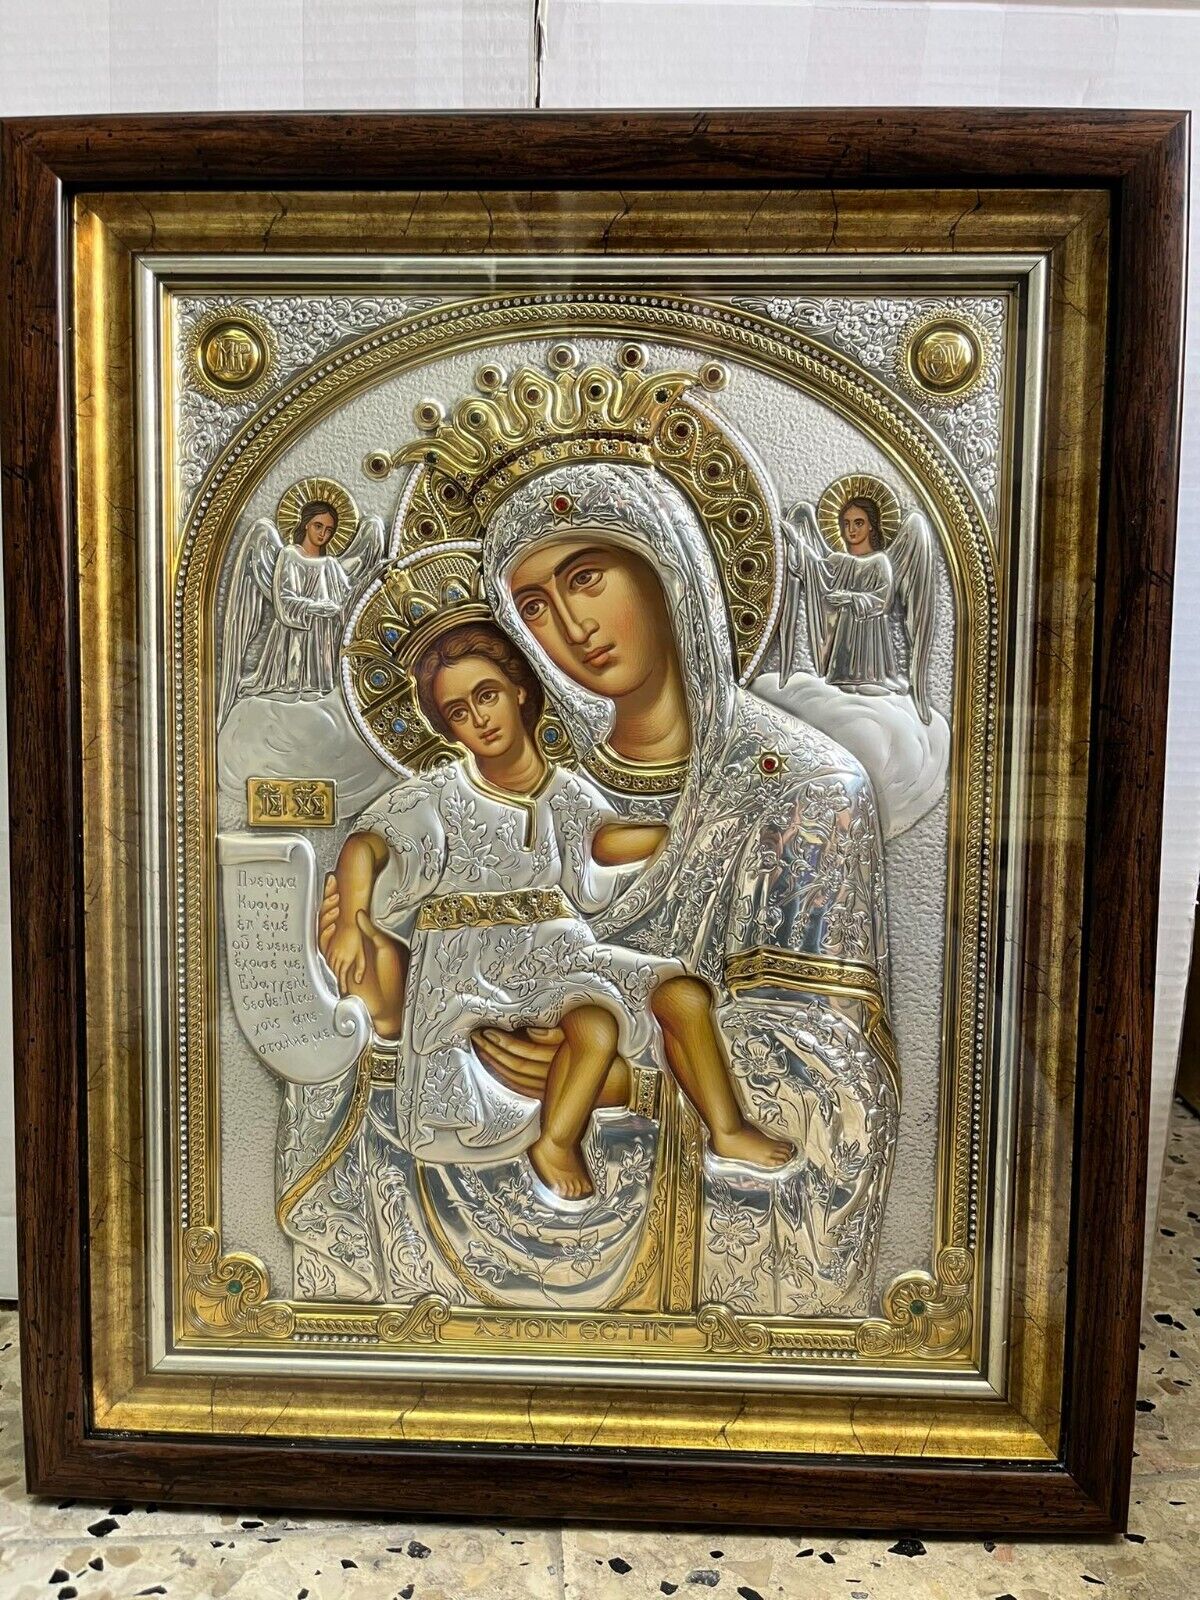 Axion Estin Icon Of The Theotokos(Mother Of God) Pure Silver 925 From Holy Land